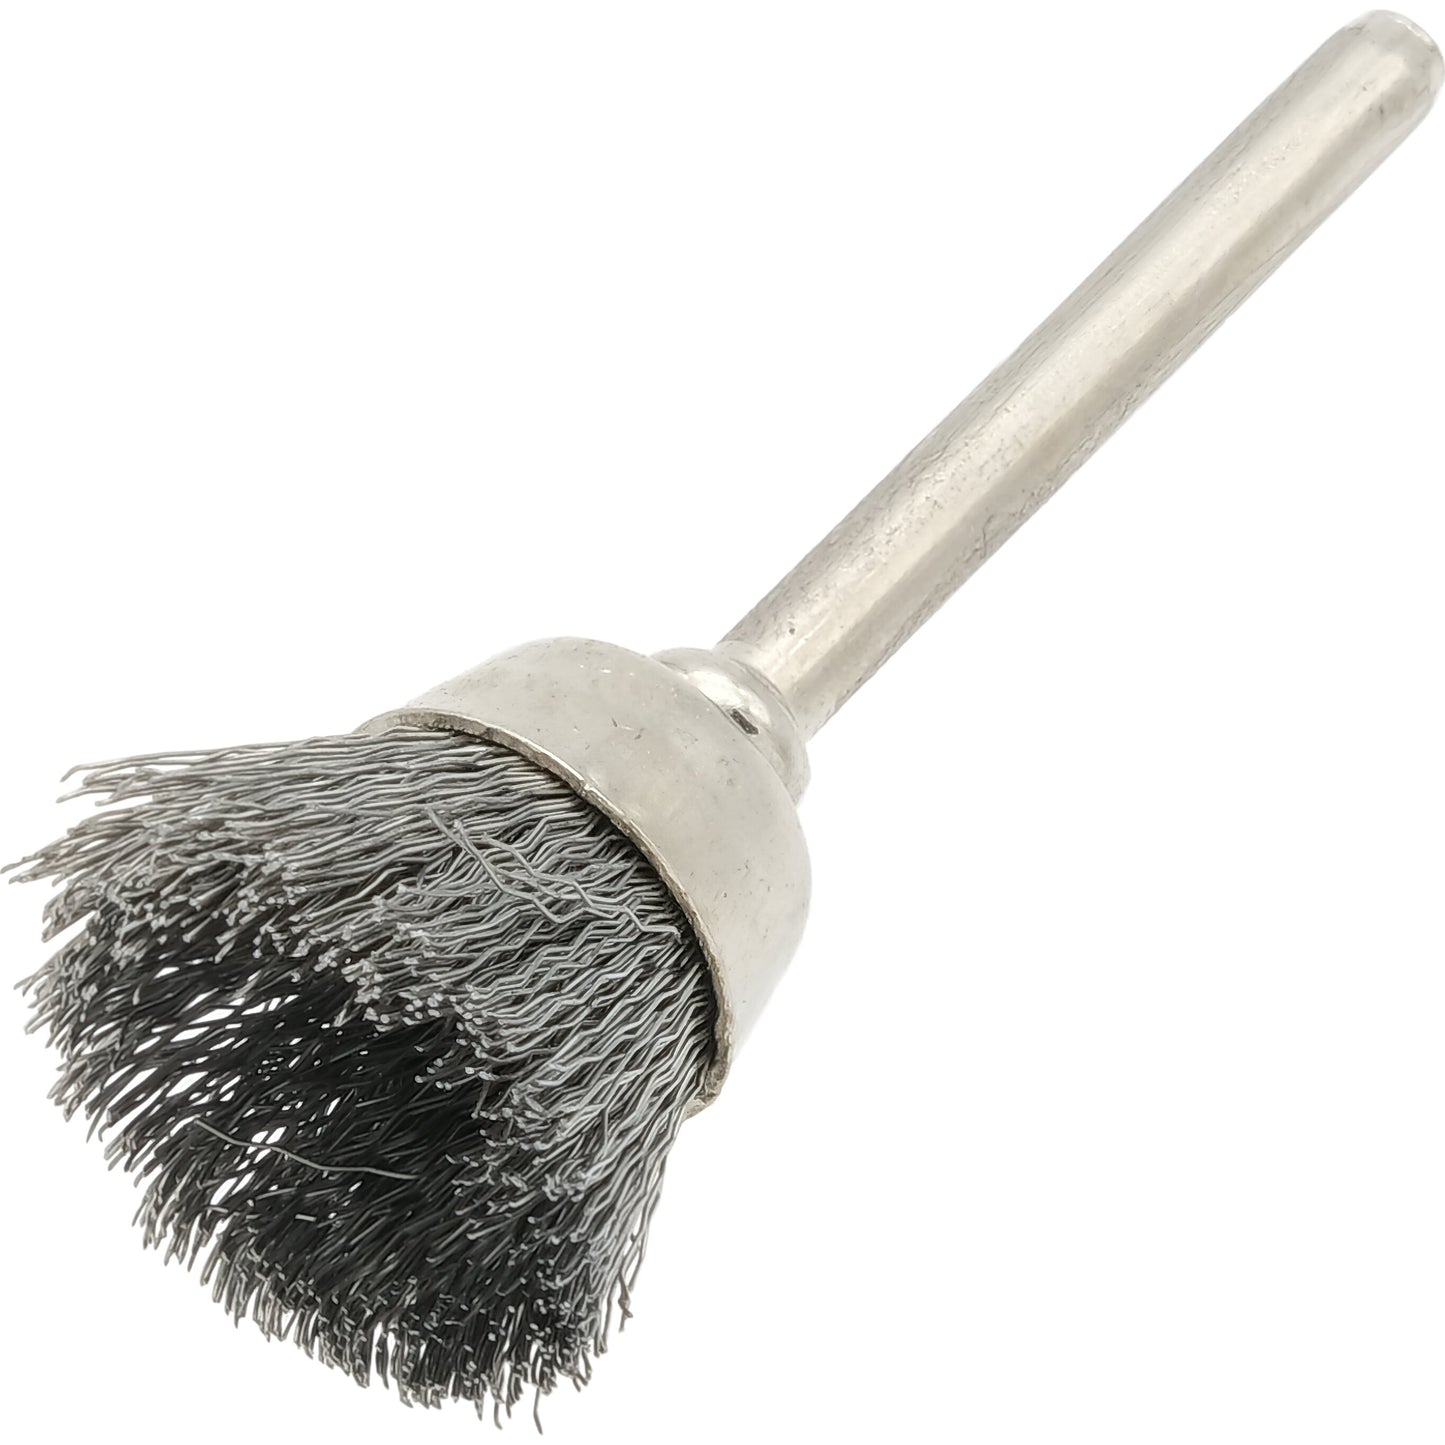 Cup Brushes Steel 3/4" 12Pcs